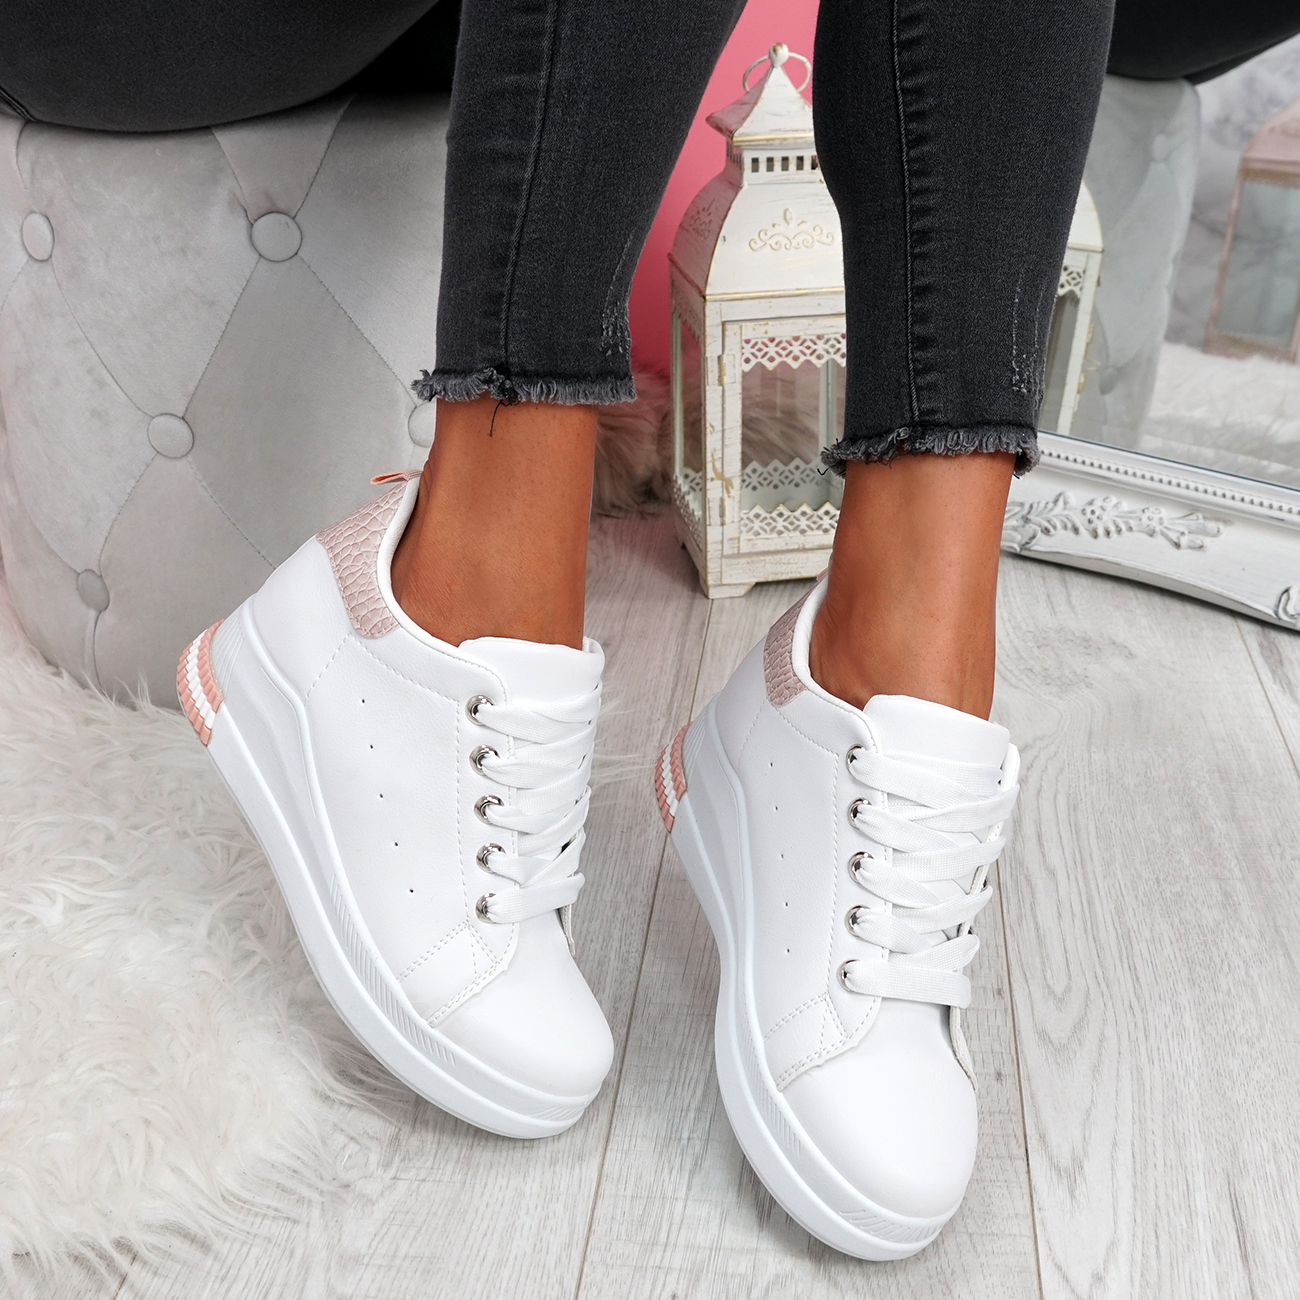 WOMENS LADIES LACE UP WEDGE PARTY TRAINERS WOMEN CASUAL FASHION ...